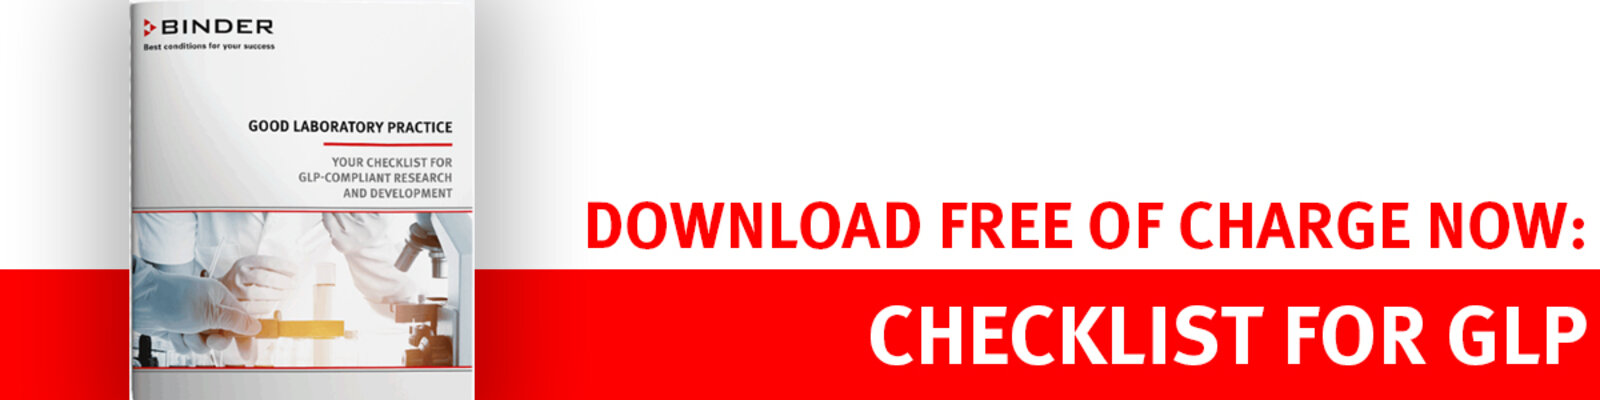 Download free of charge now - Checklist for GLP